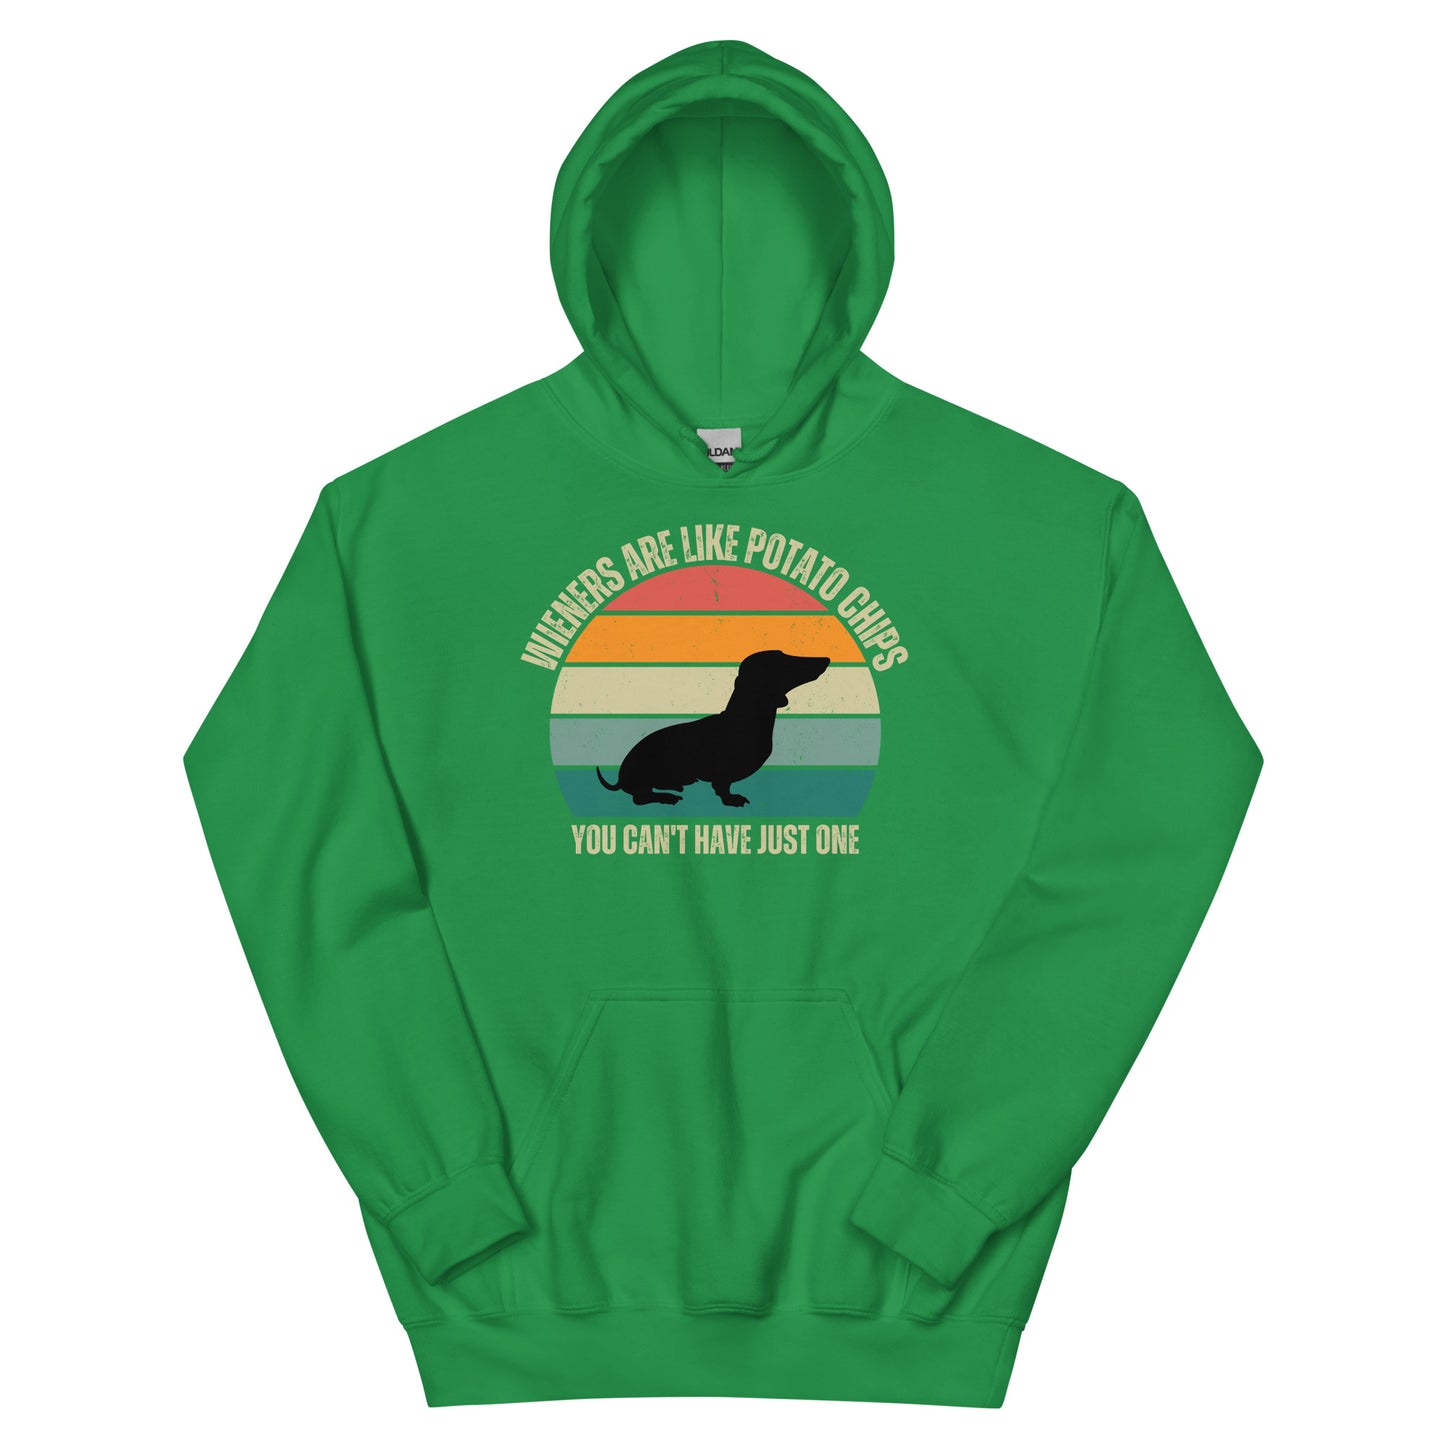 YOU CAN'T HAVE JUST ONE WIENER - Unisex Hoodie